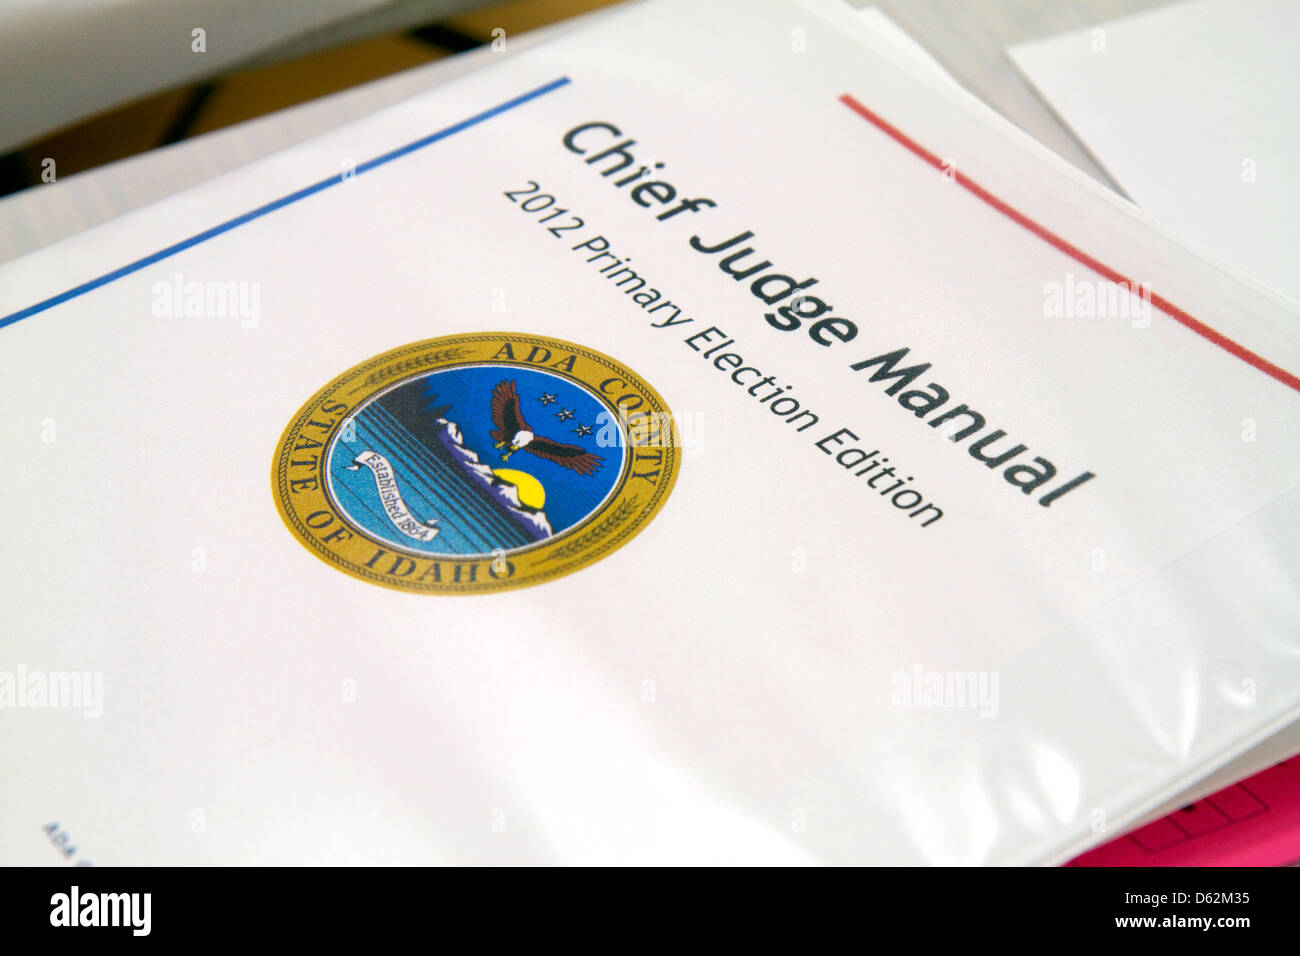 Chief Judge Manual, a guidebook for election workers in Boise, Idaho, USA. Stock Photo